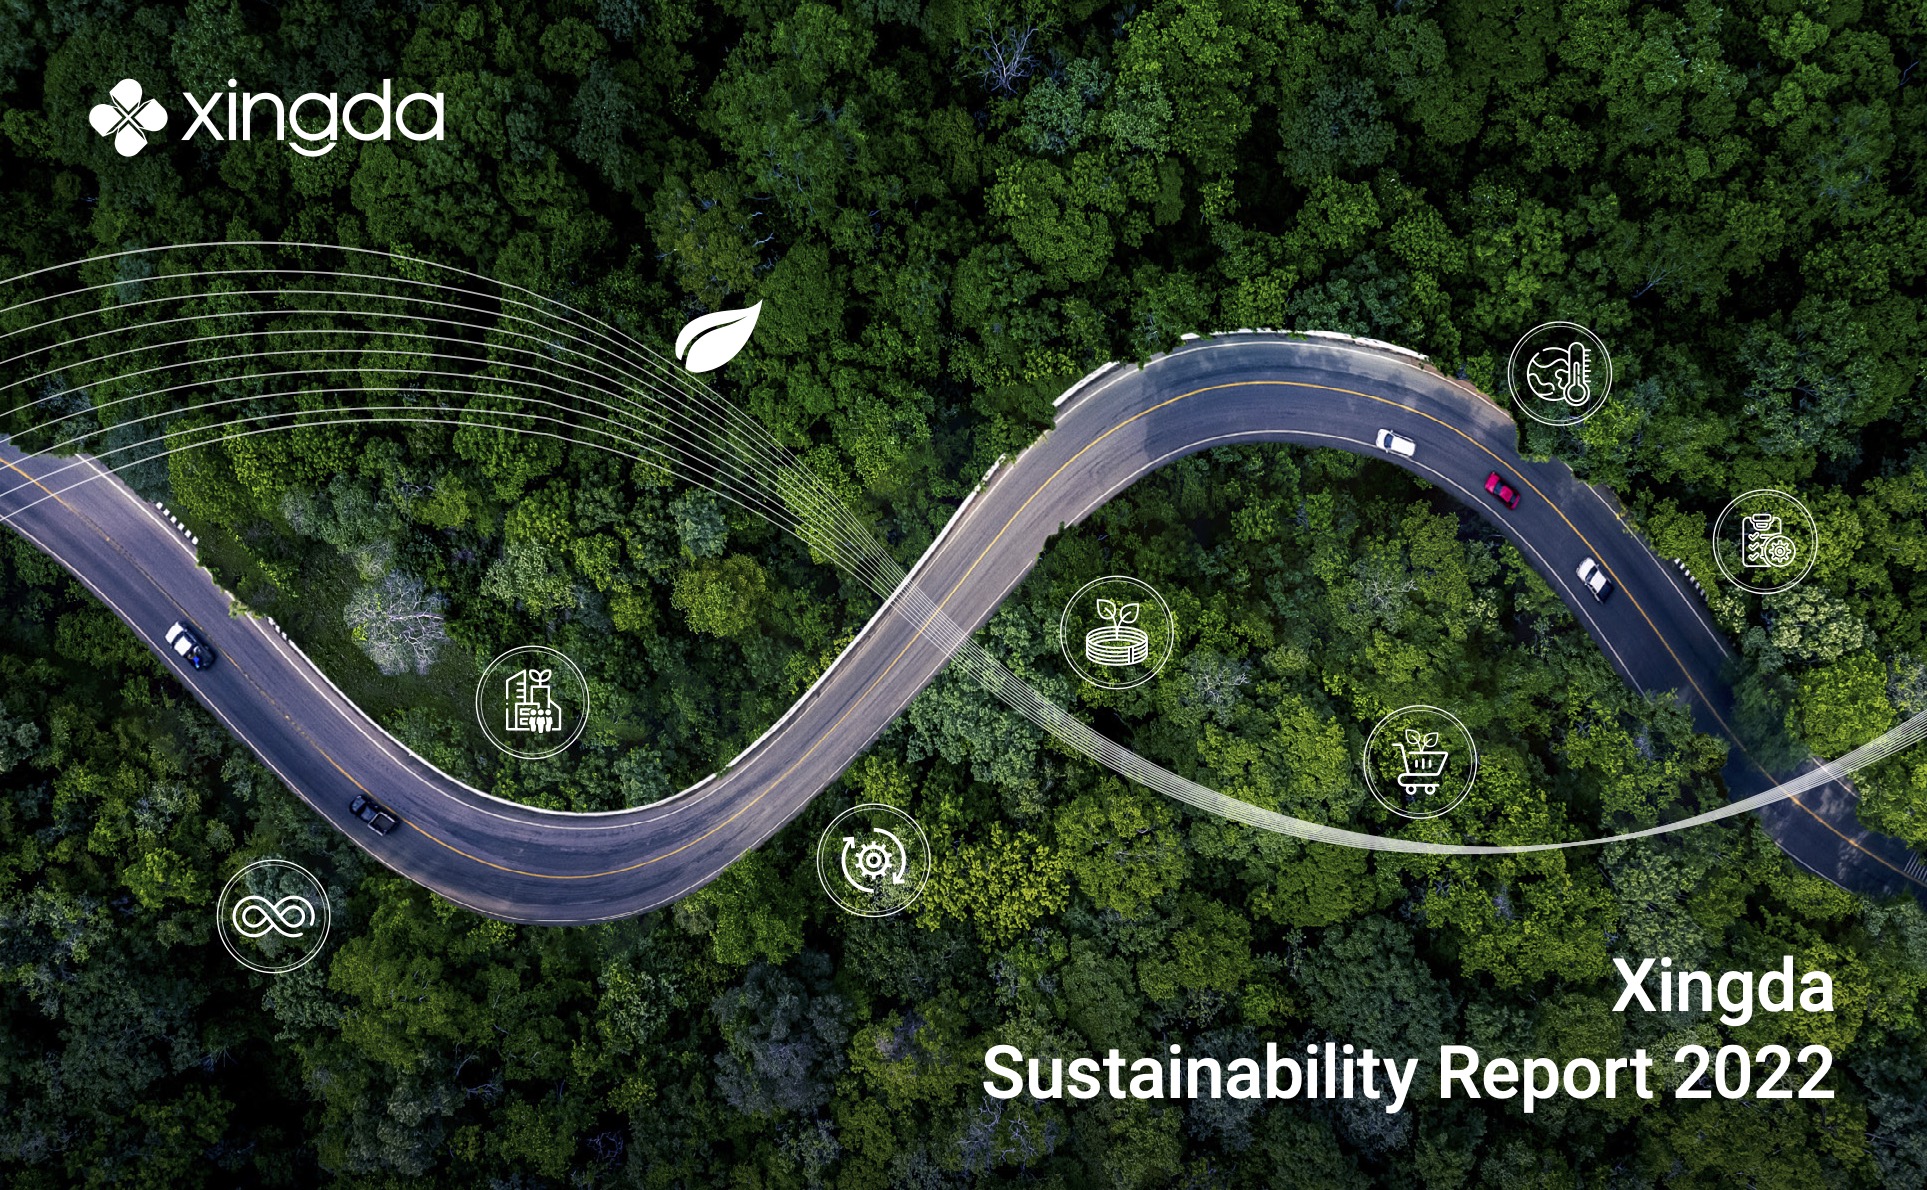 Xingda publishes 2022 sustainability report, EV tyre cord >32% of output